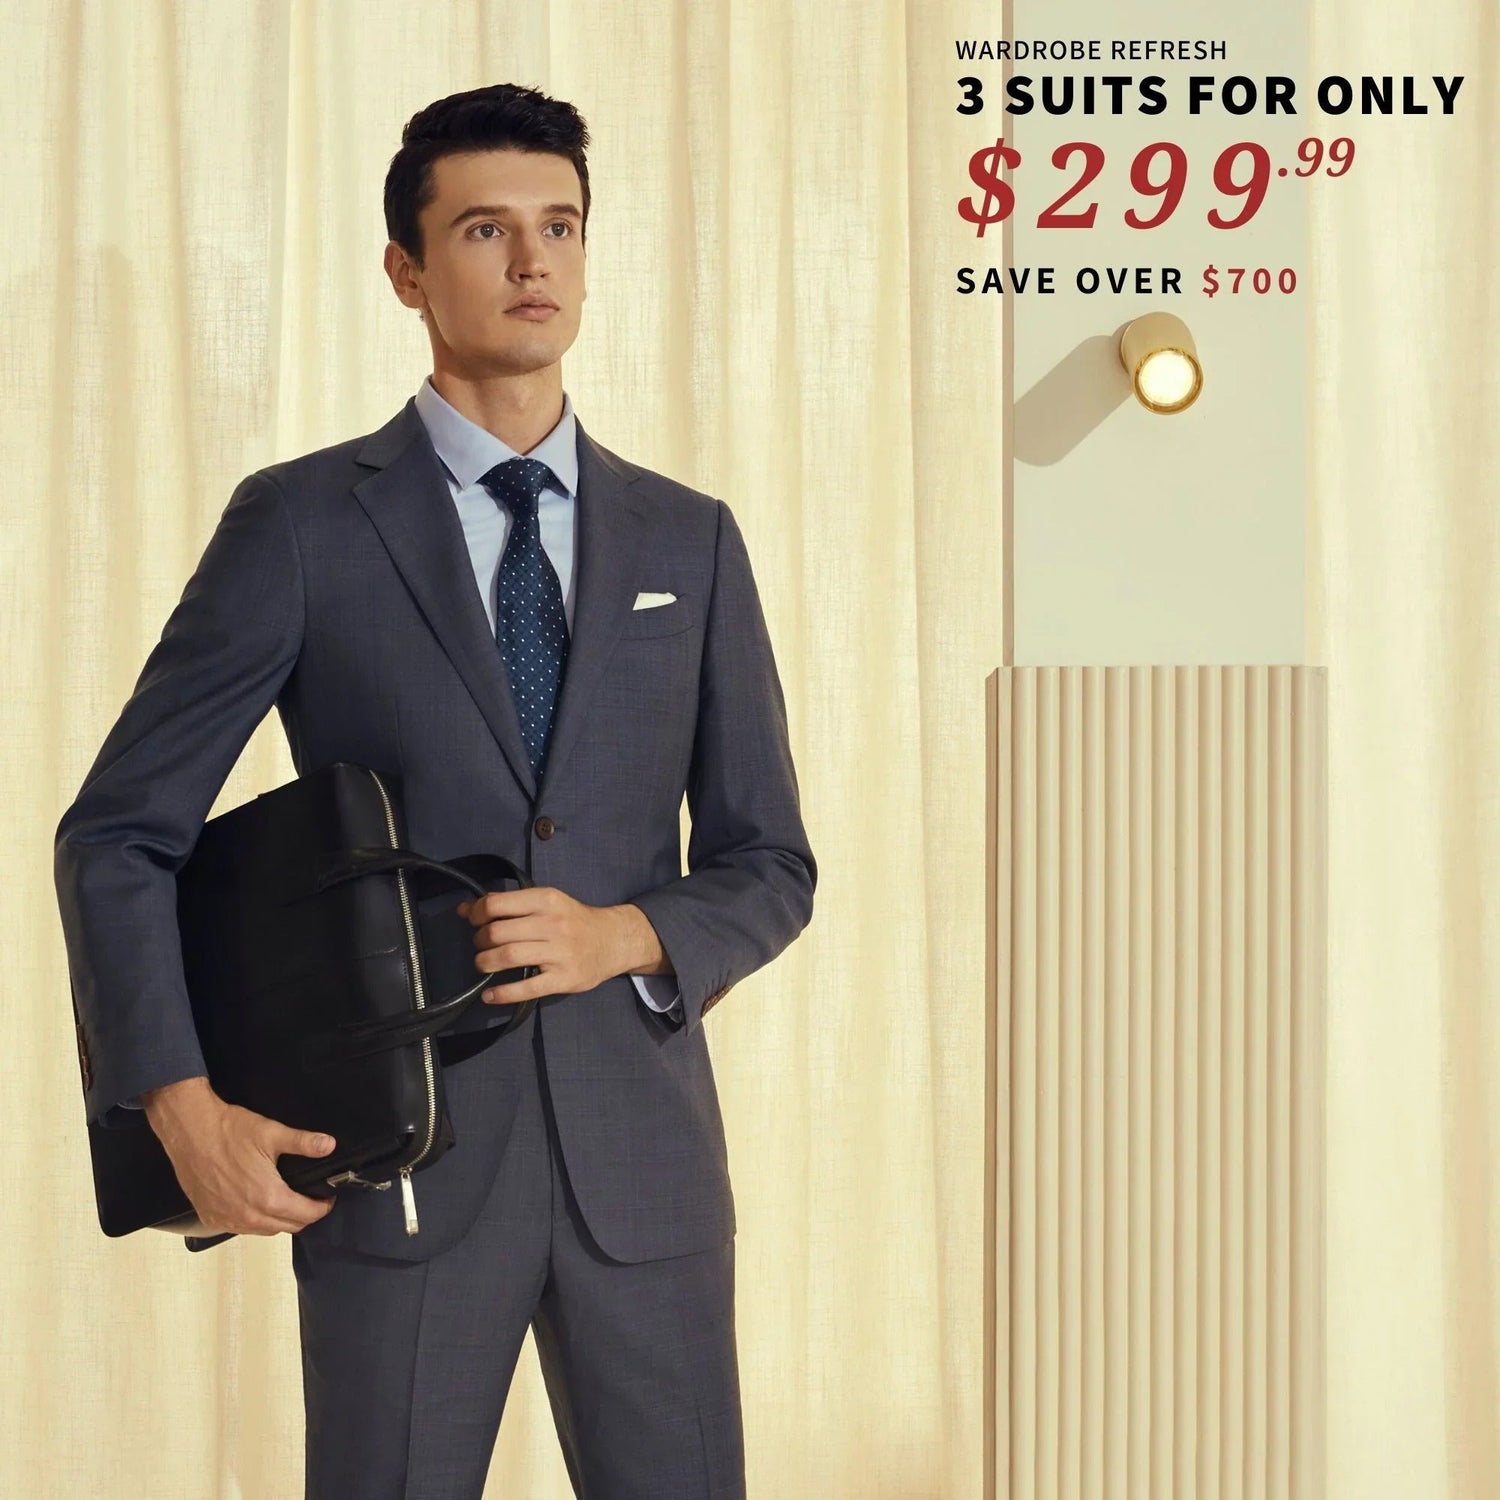 Man in a business suit holding a helmet with an online-only promotional offer for BYOB suits in the background.